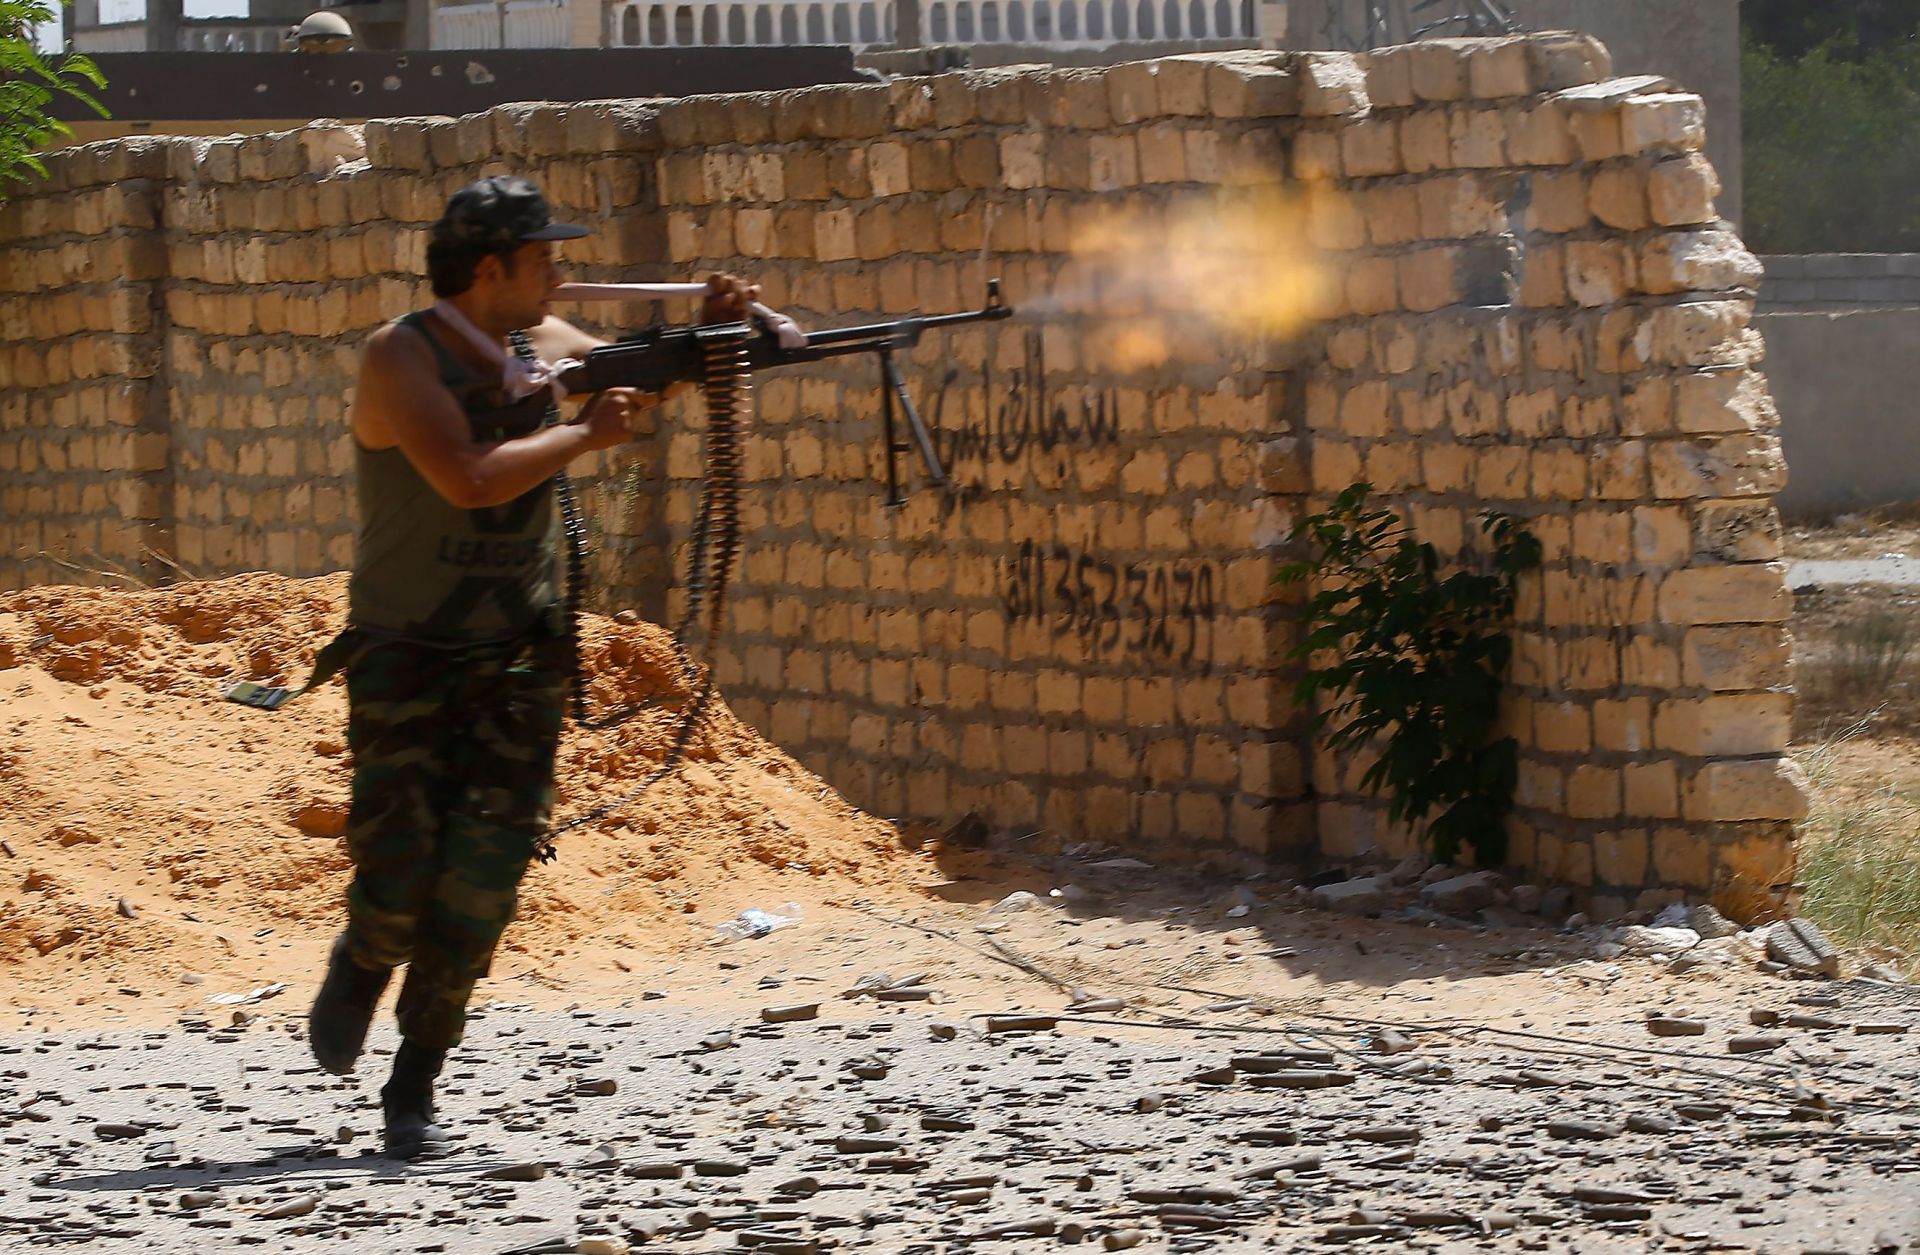 A fighter loyal to Libya's internationally recognized government in Tripoli fires on forces allied with Khalifa Hifter's Libyan National Army during clashes in Ain Zara on Sept. 7, 2019.